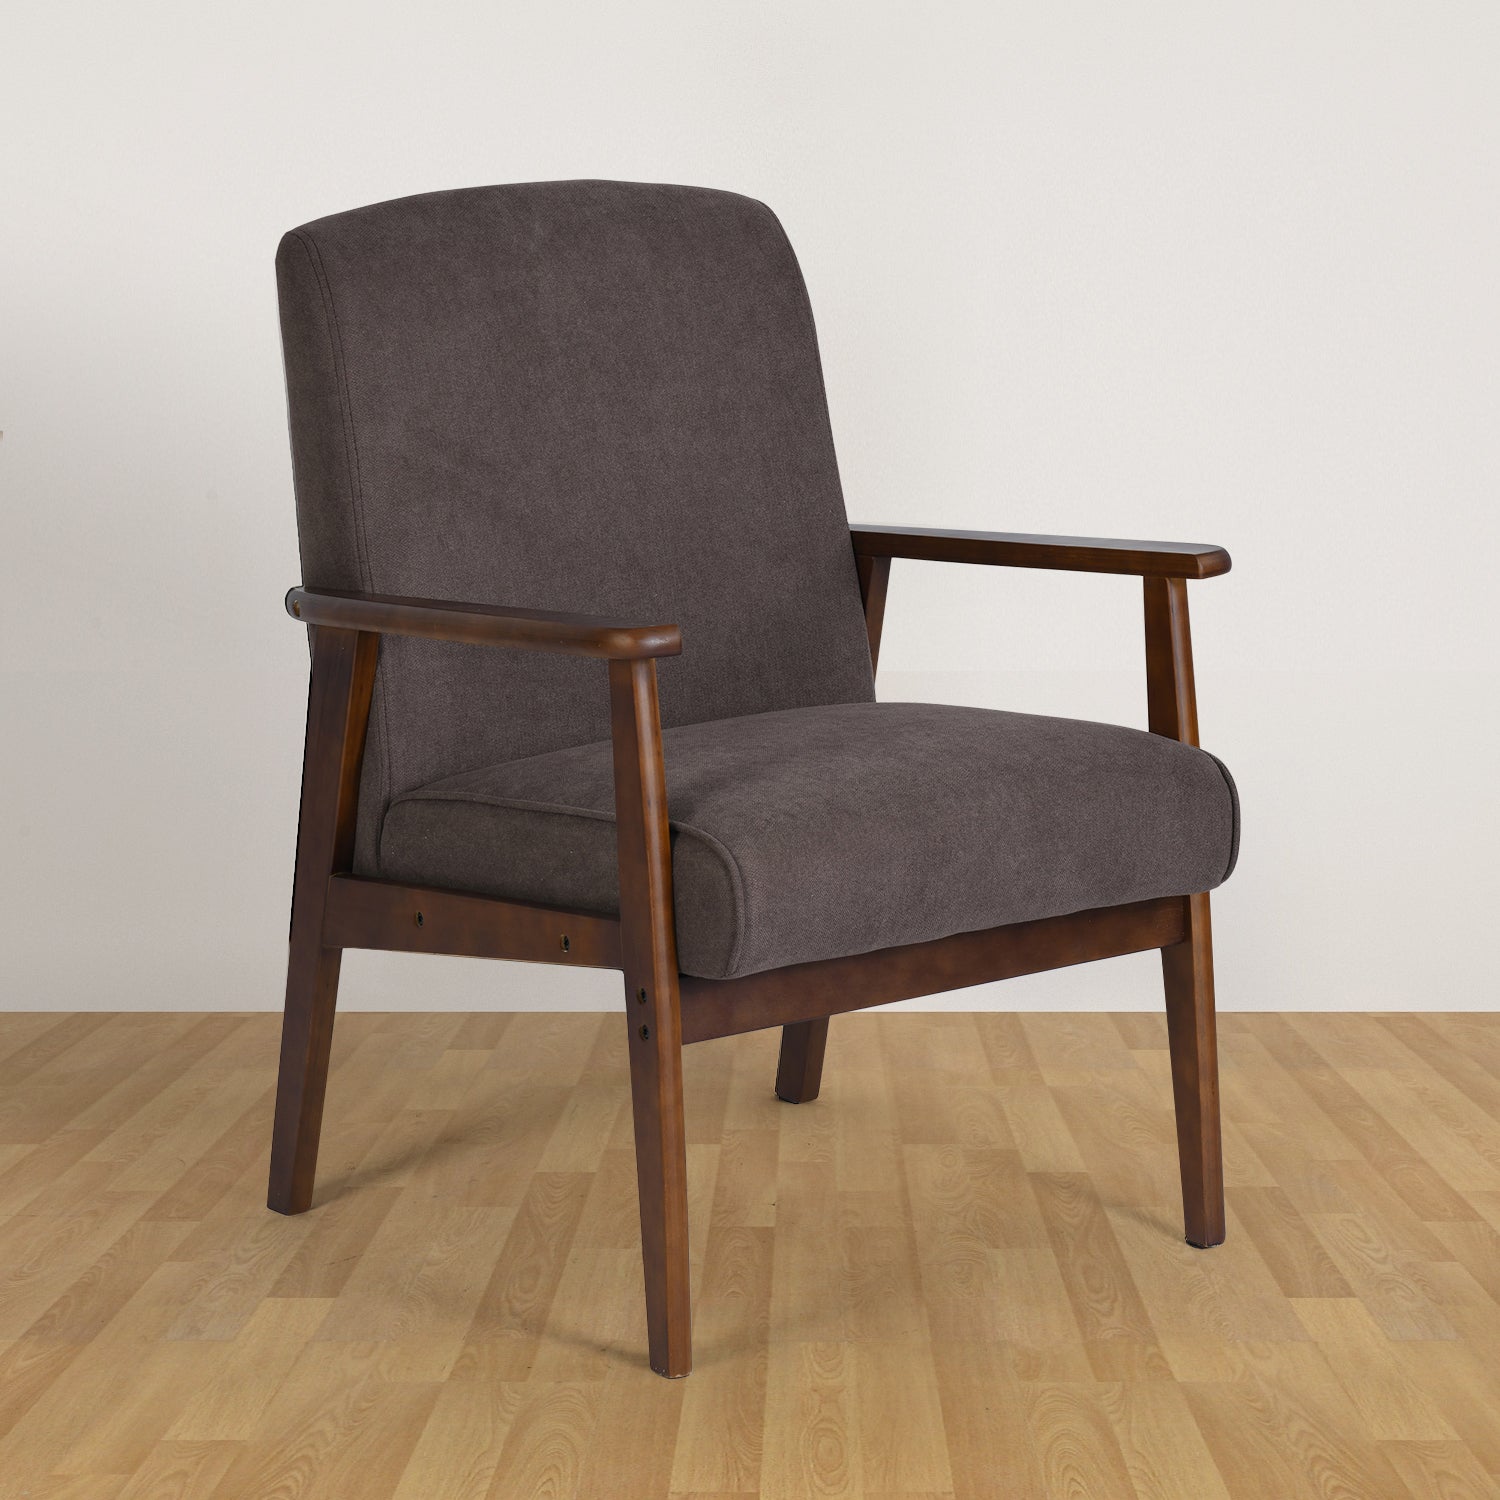 Bruqax Wooden Frame Accent Chair